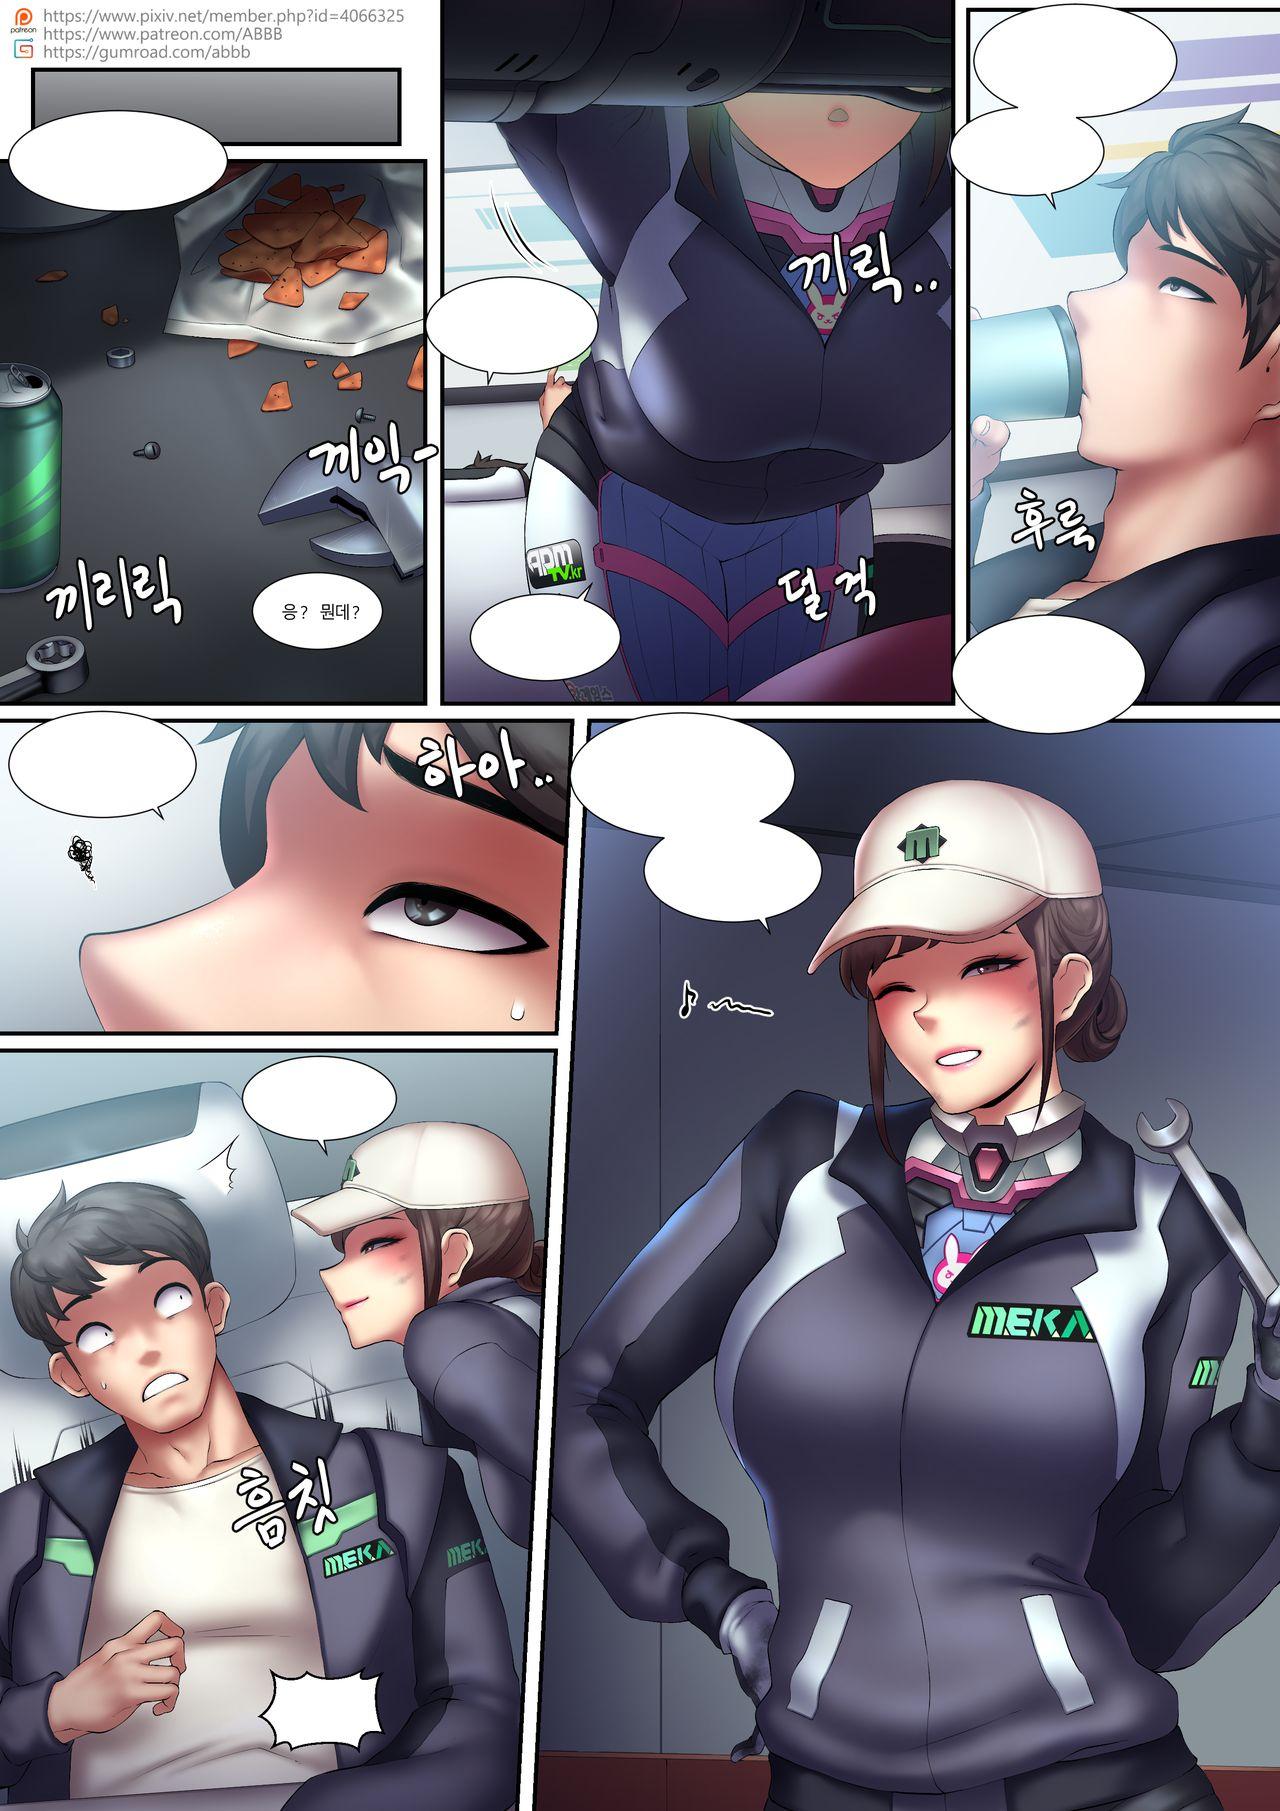 Pervs Shooting Star - Overwatch Free Hardcore - Page 2